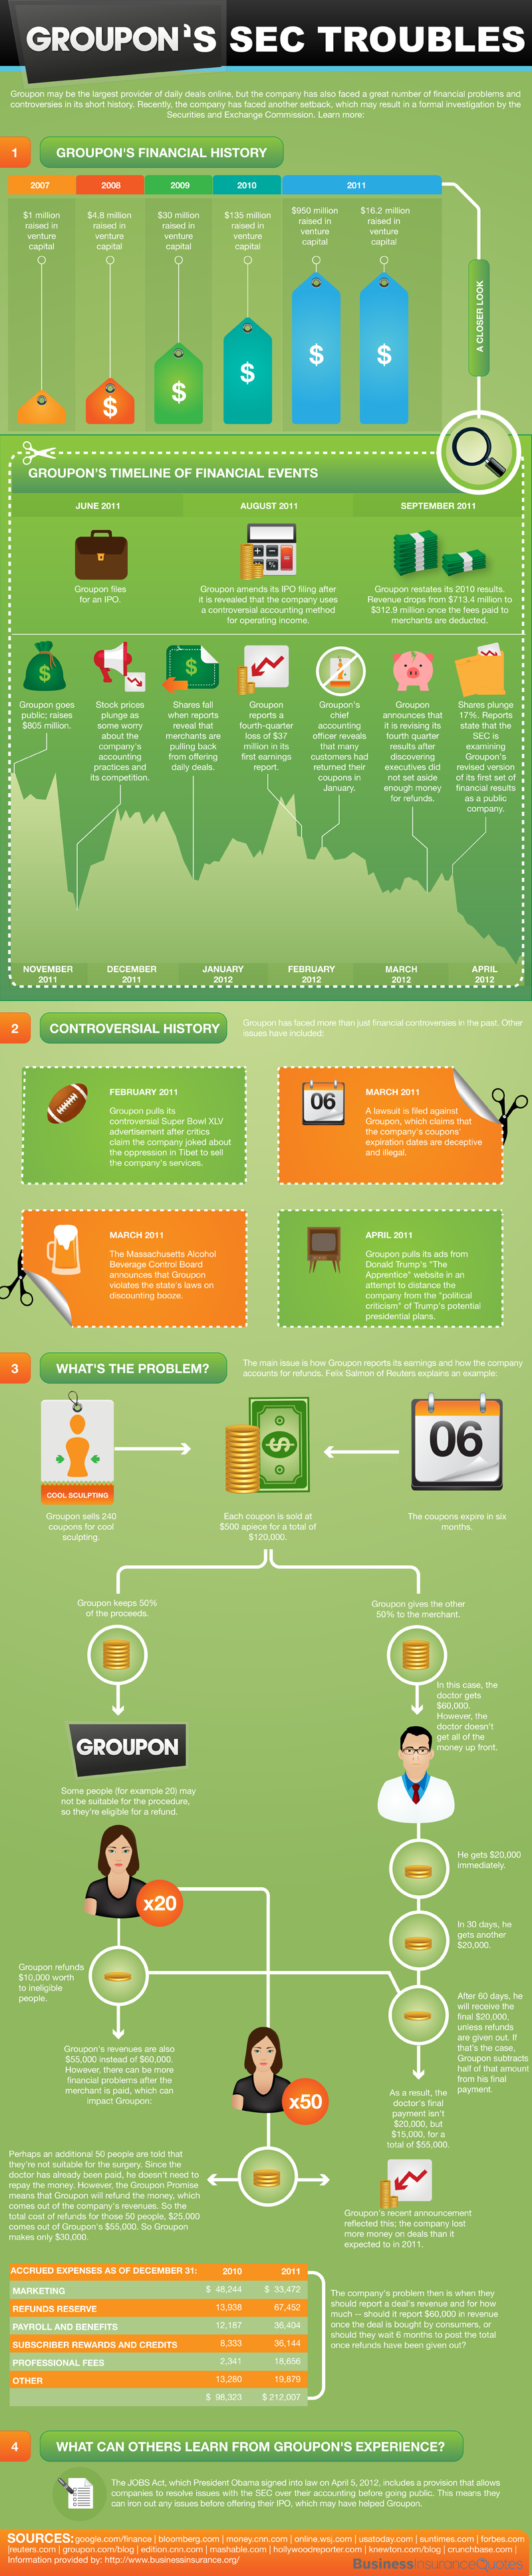 Groupon SEC Troubles Infographic